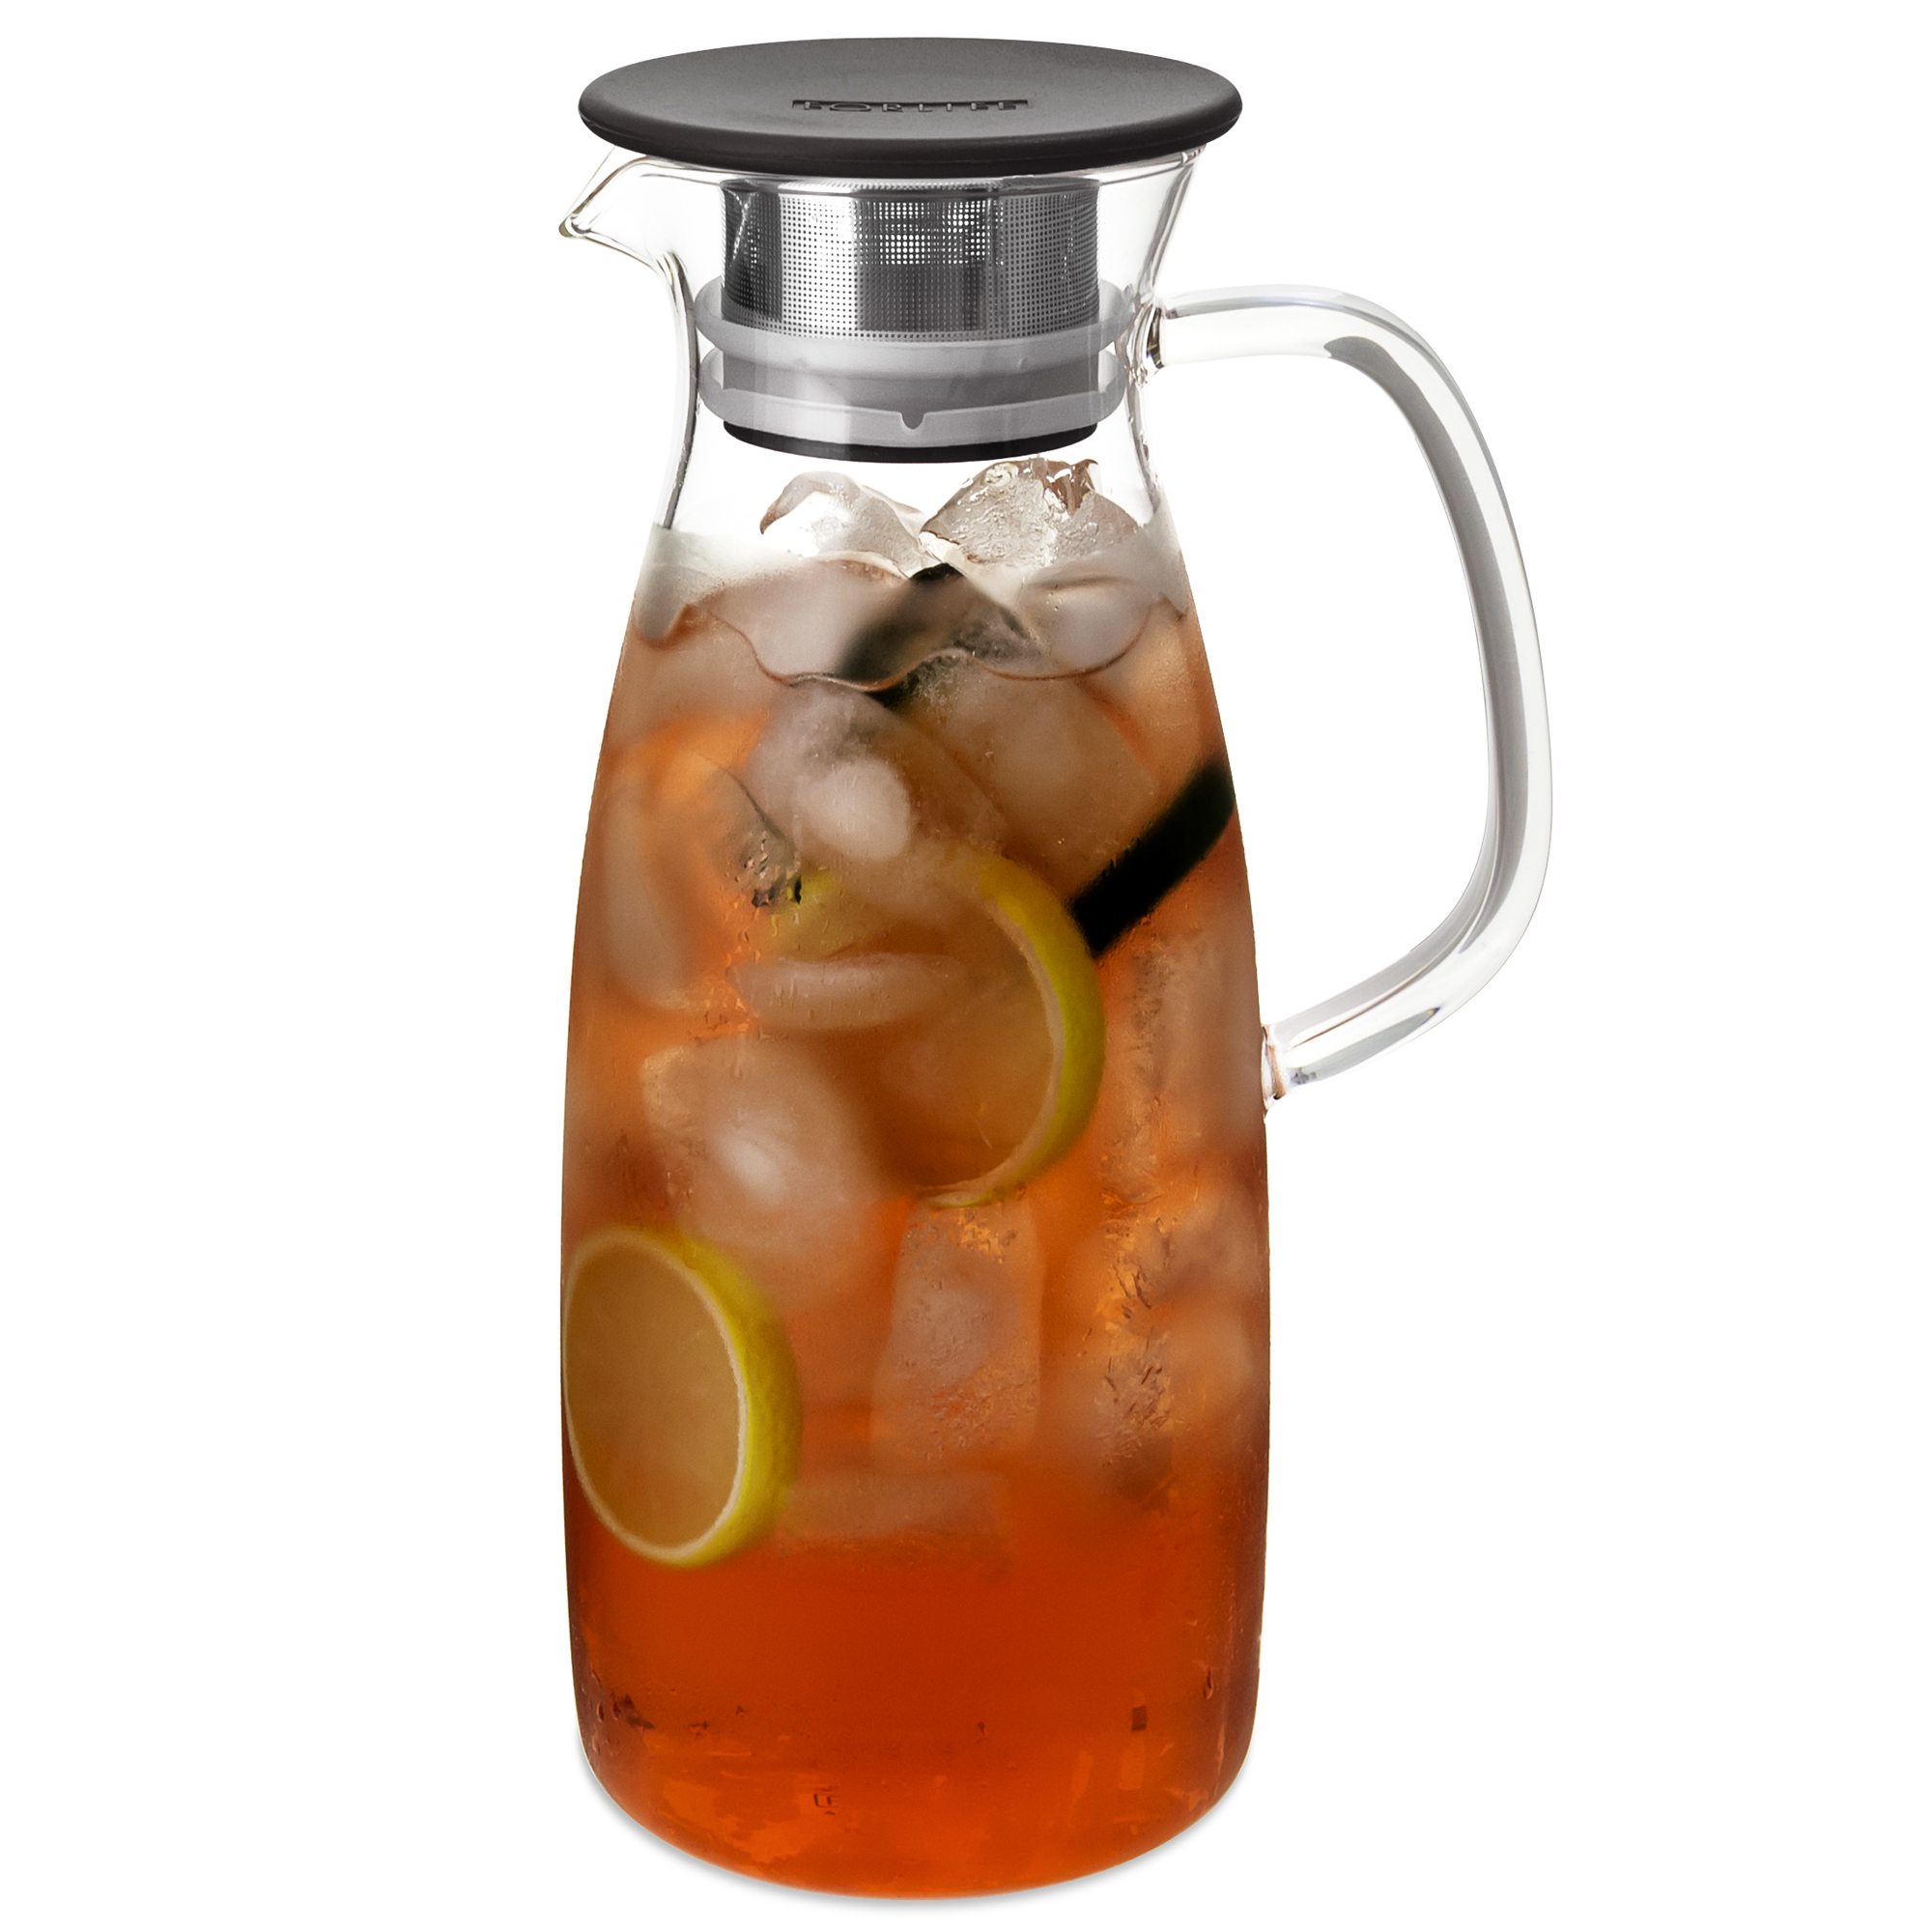 Glass Pitcher-50oz. Carafe with Stainless Steel Filter Lid- Heat